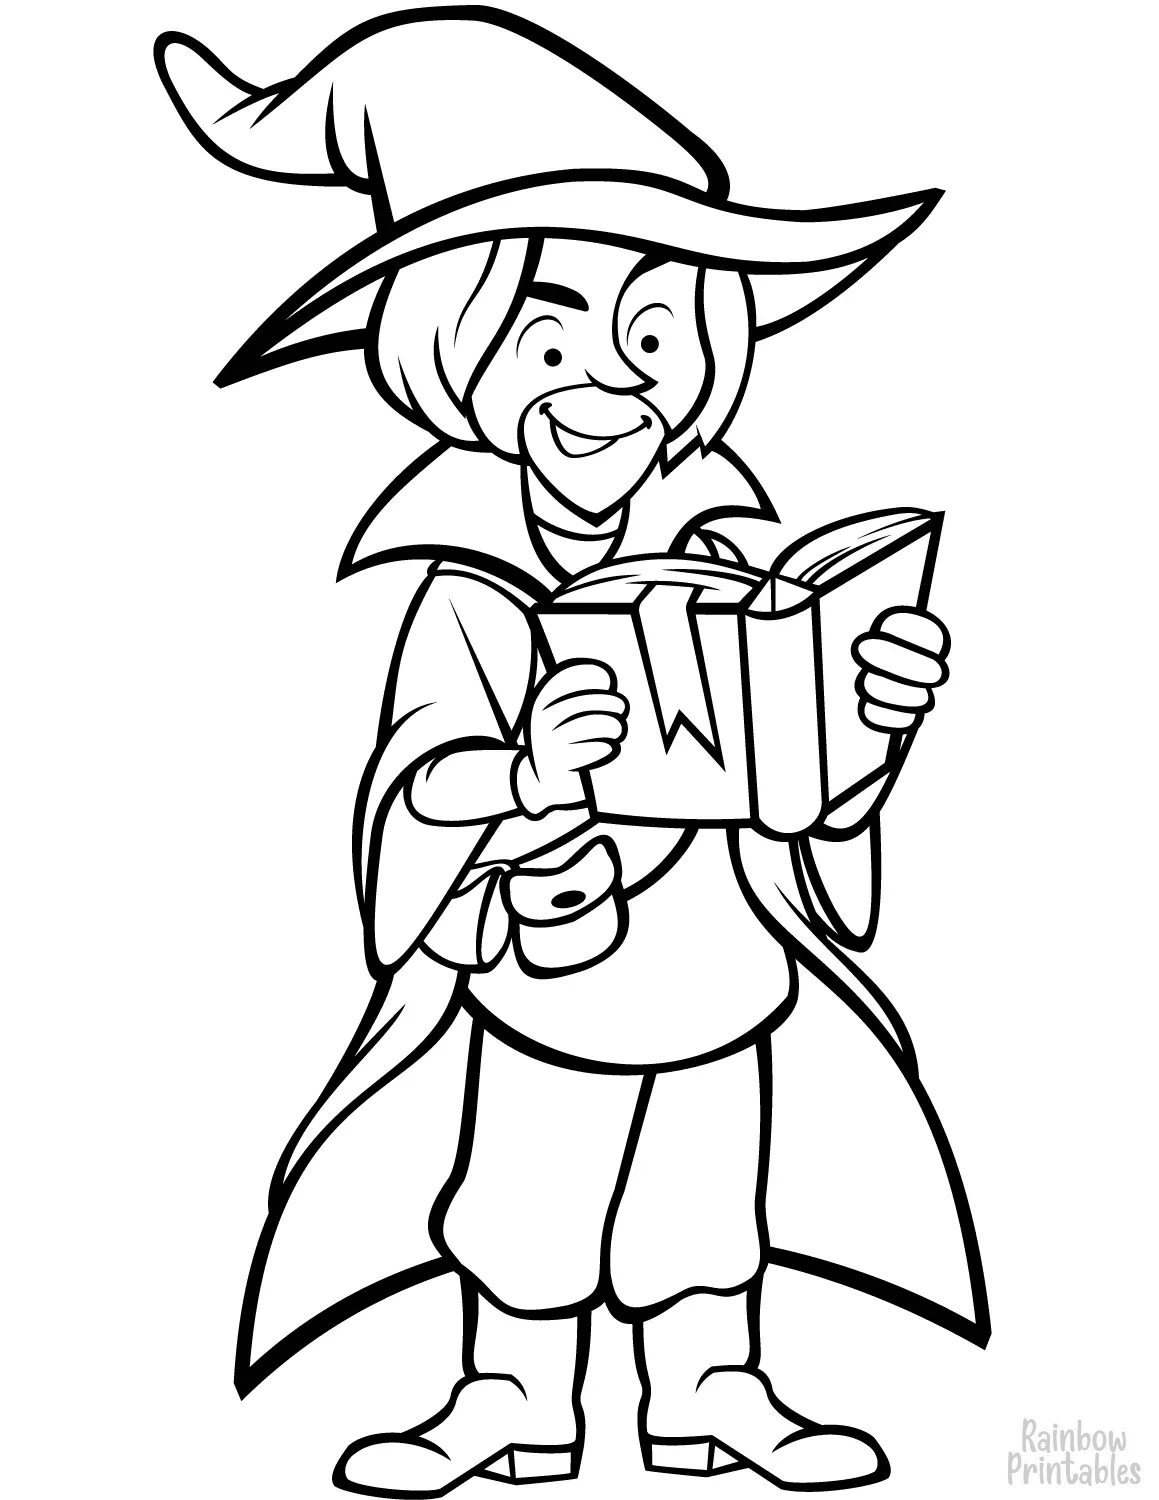 WIZARD WITH BOOK Halloween Line Art Drawing Set Free Activity Coloring Pages for Kids-02